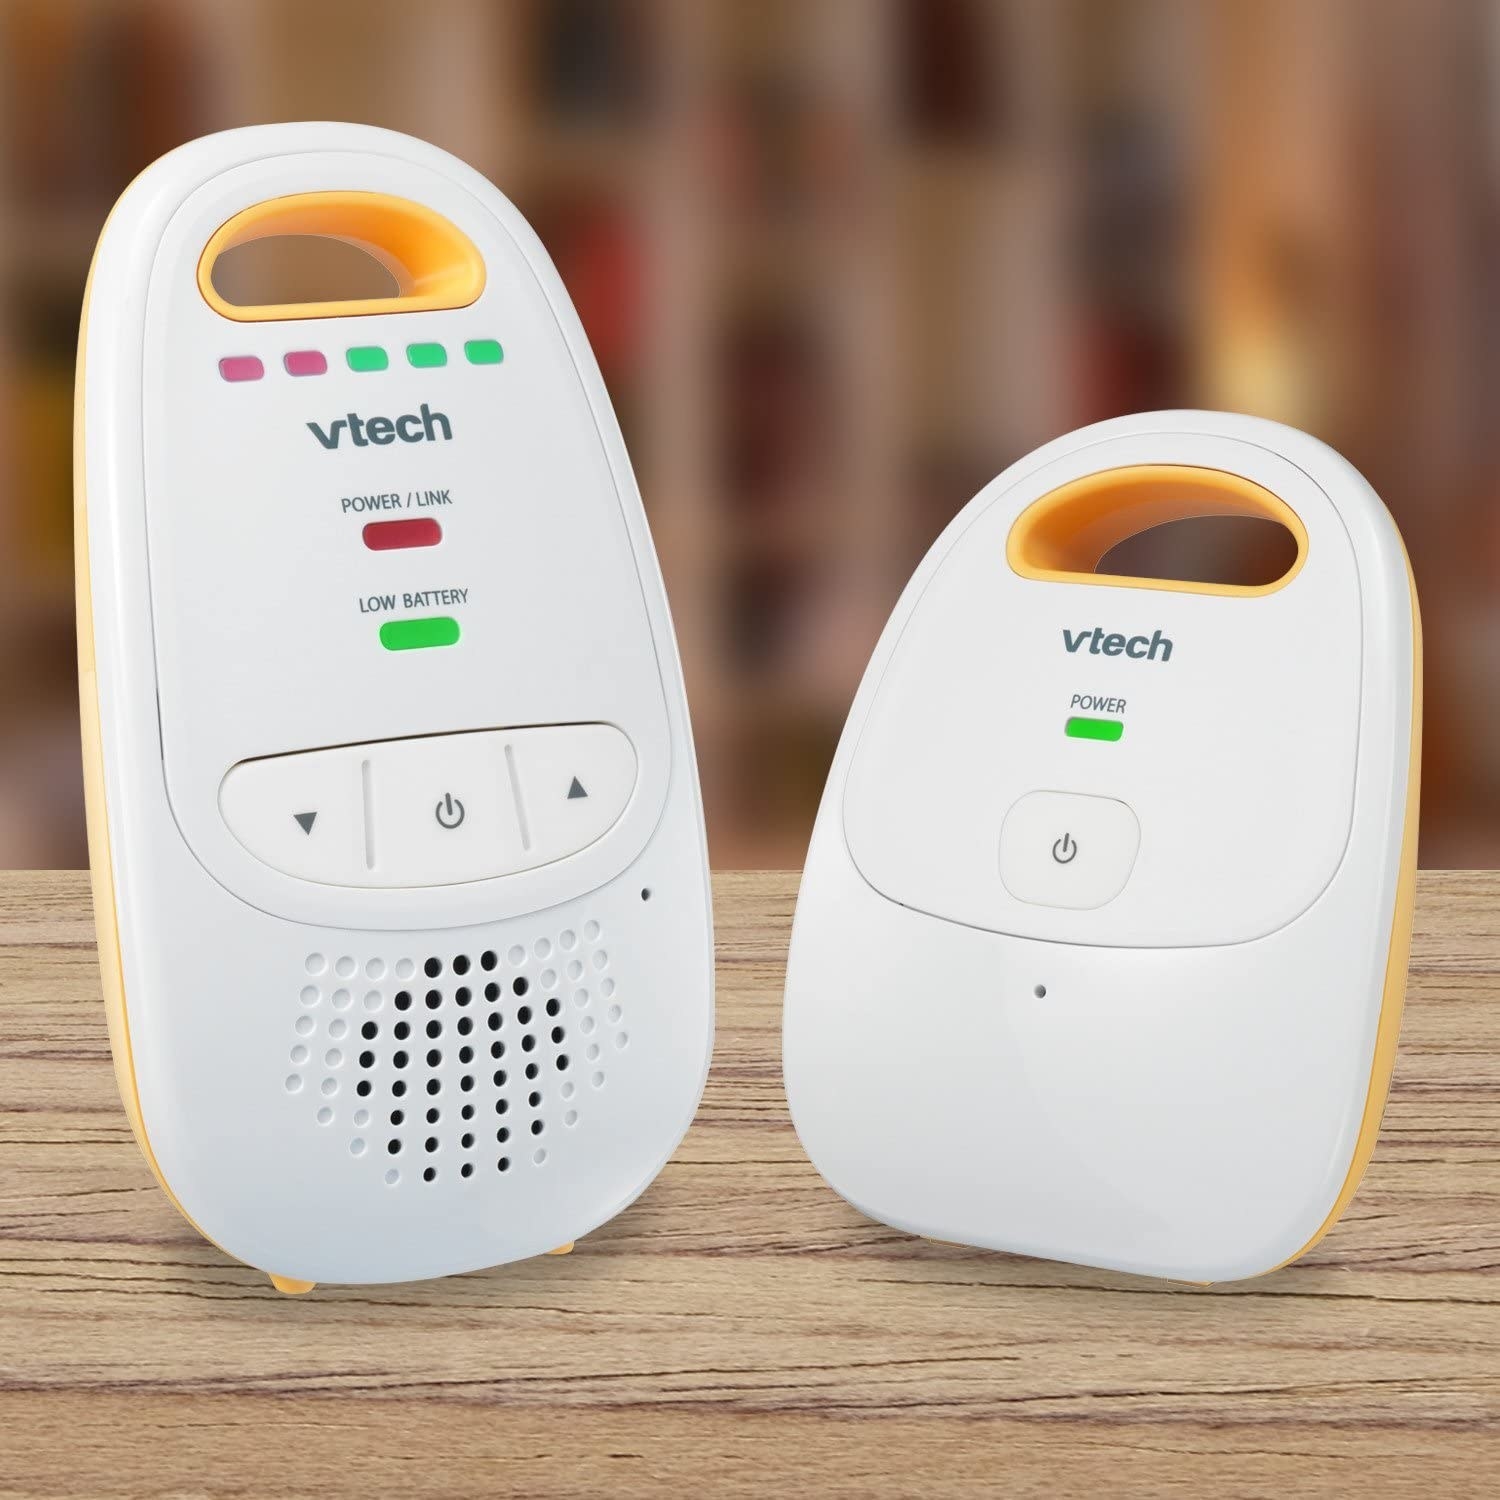 A round plastic baby monitor device with a walkie talkie next to it